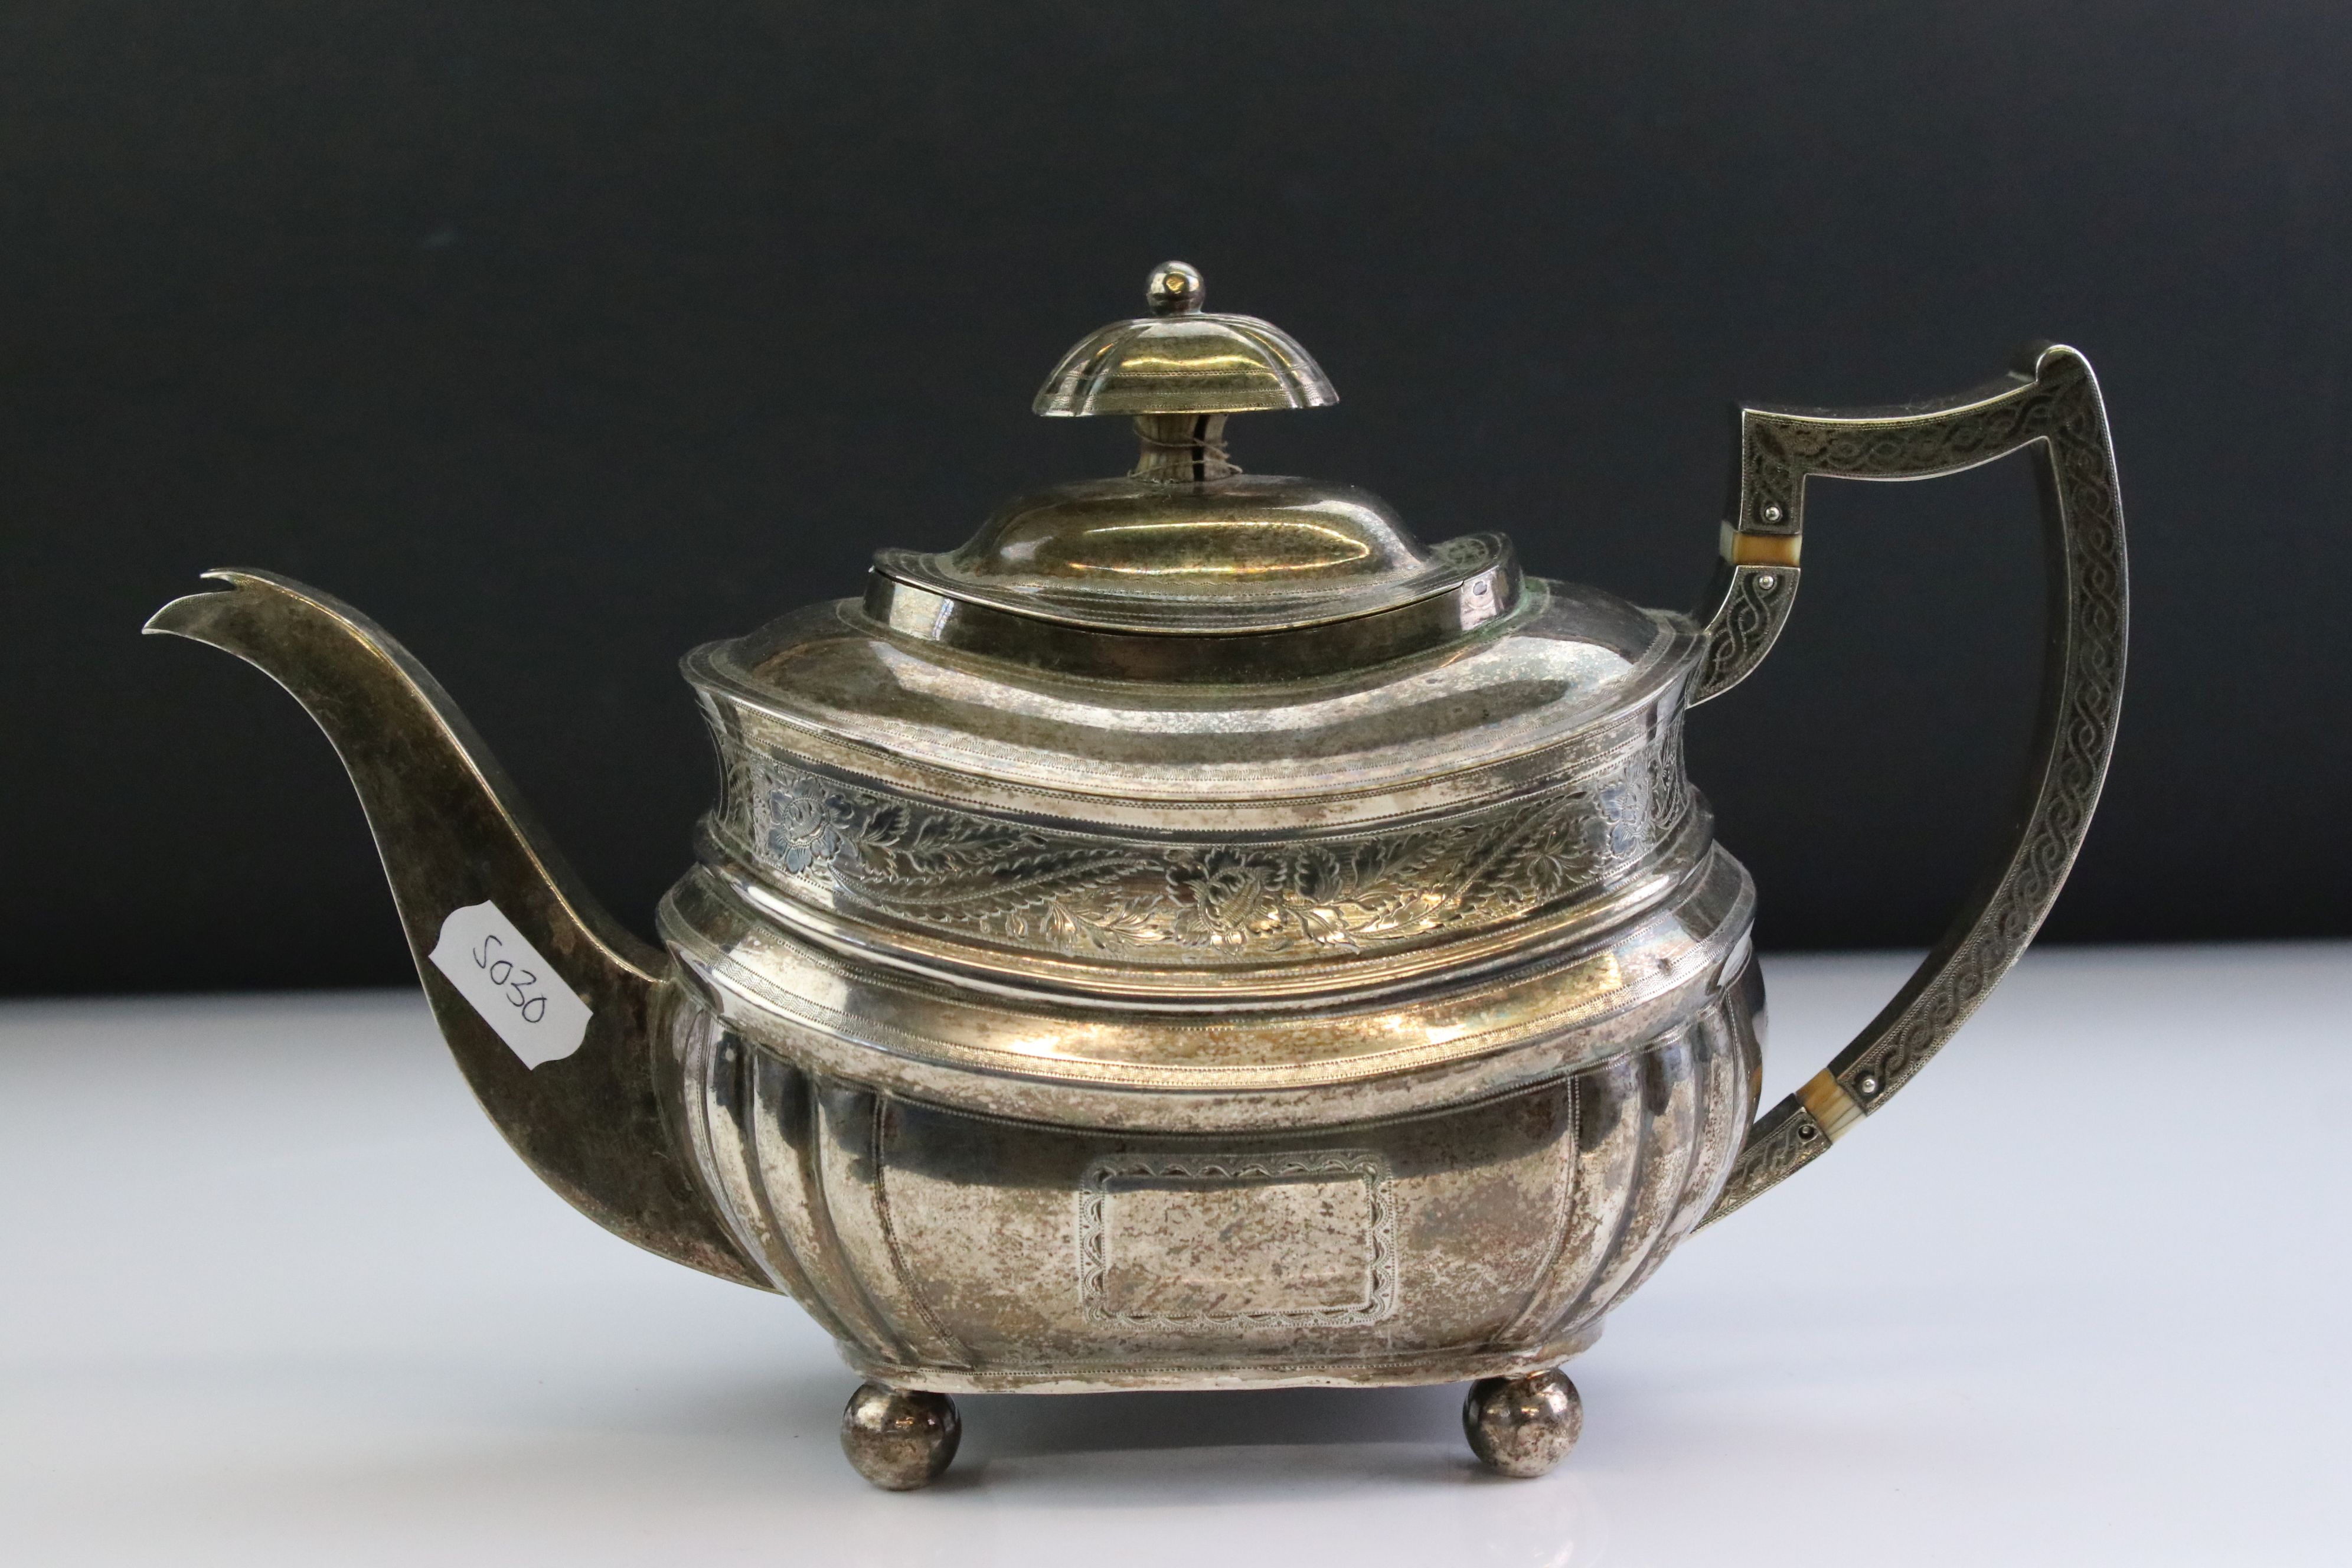 George III silver teapot raised on four ball feet, engraved floral and foliate decoration to the